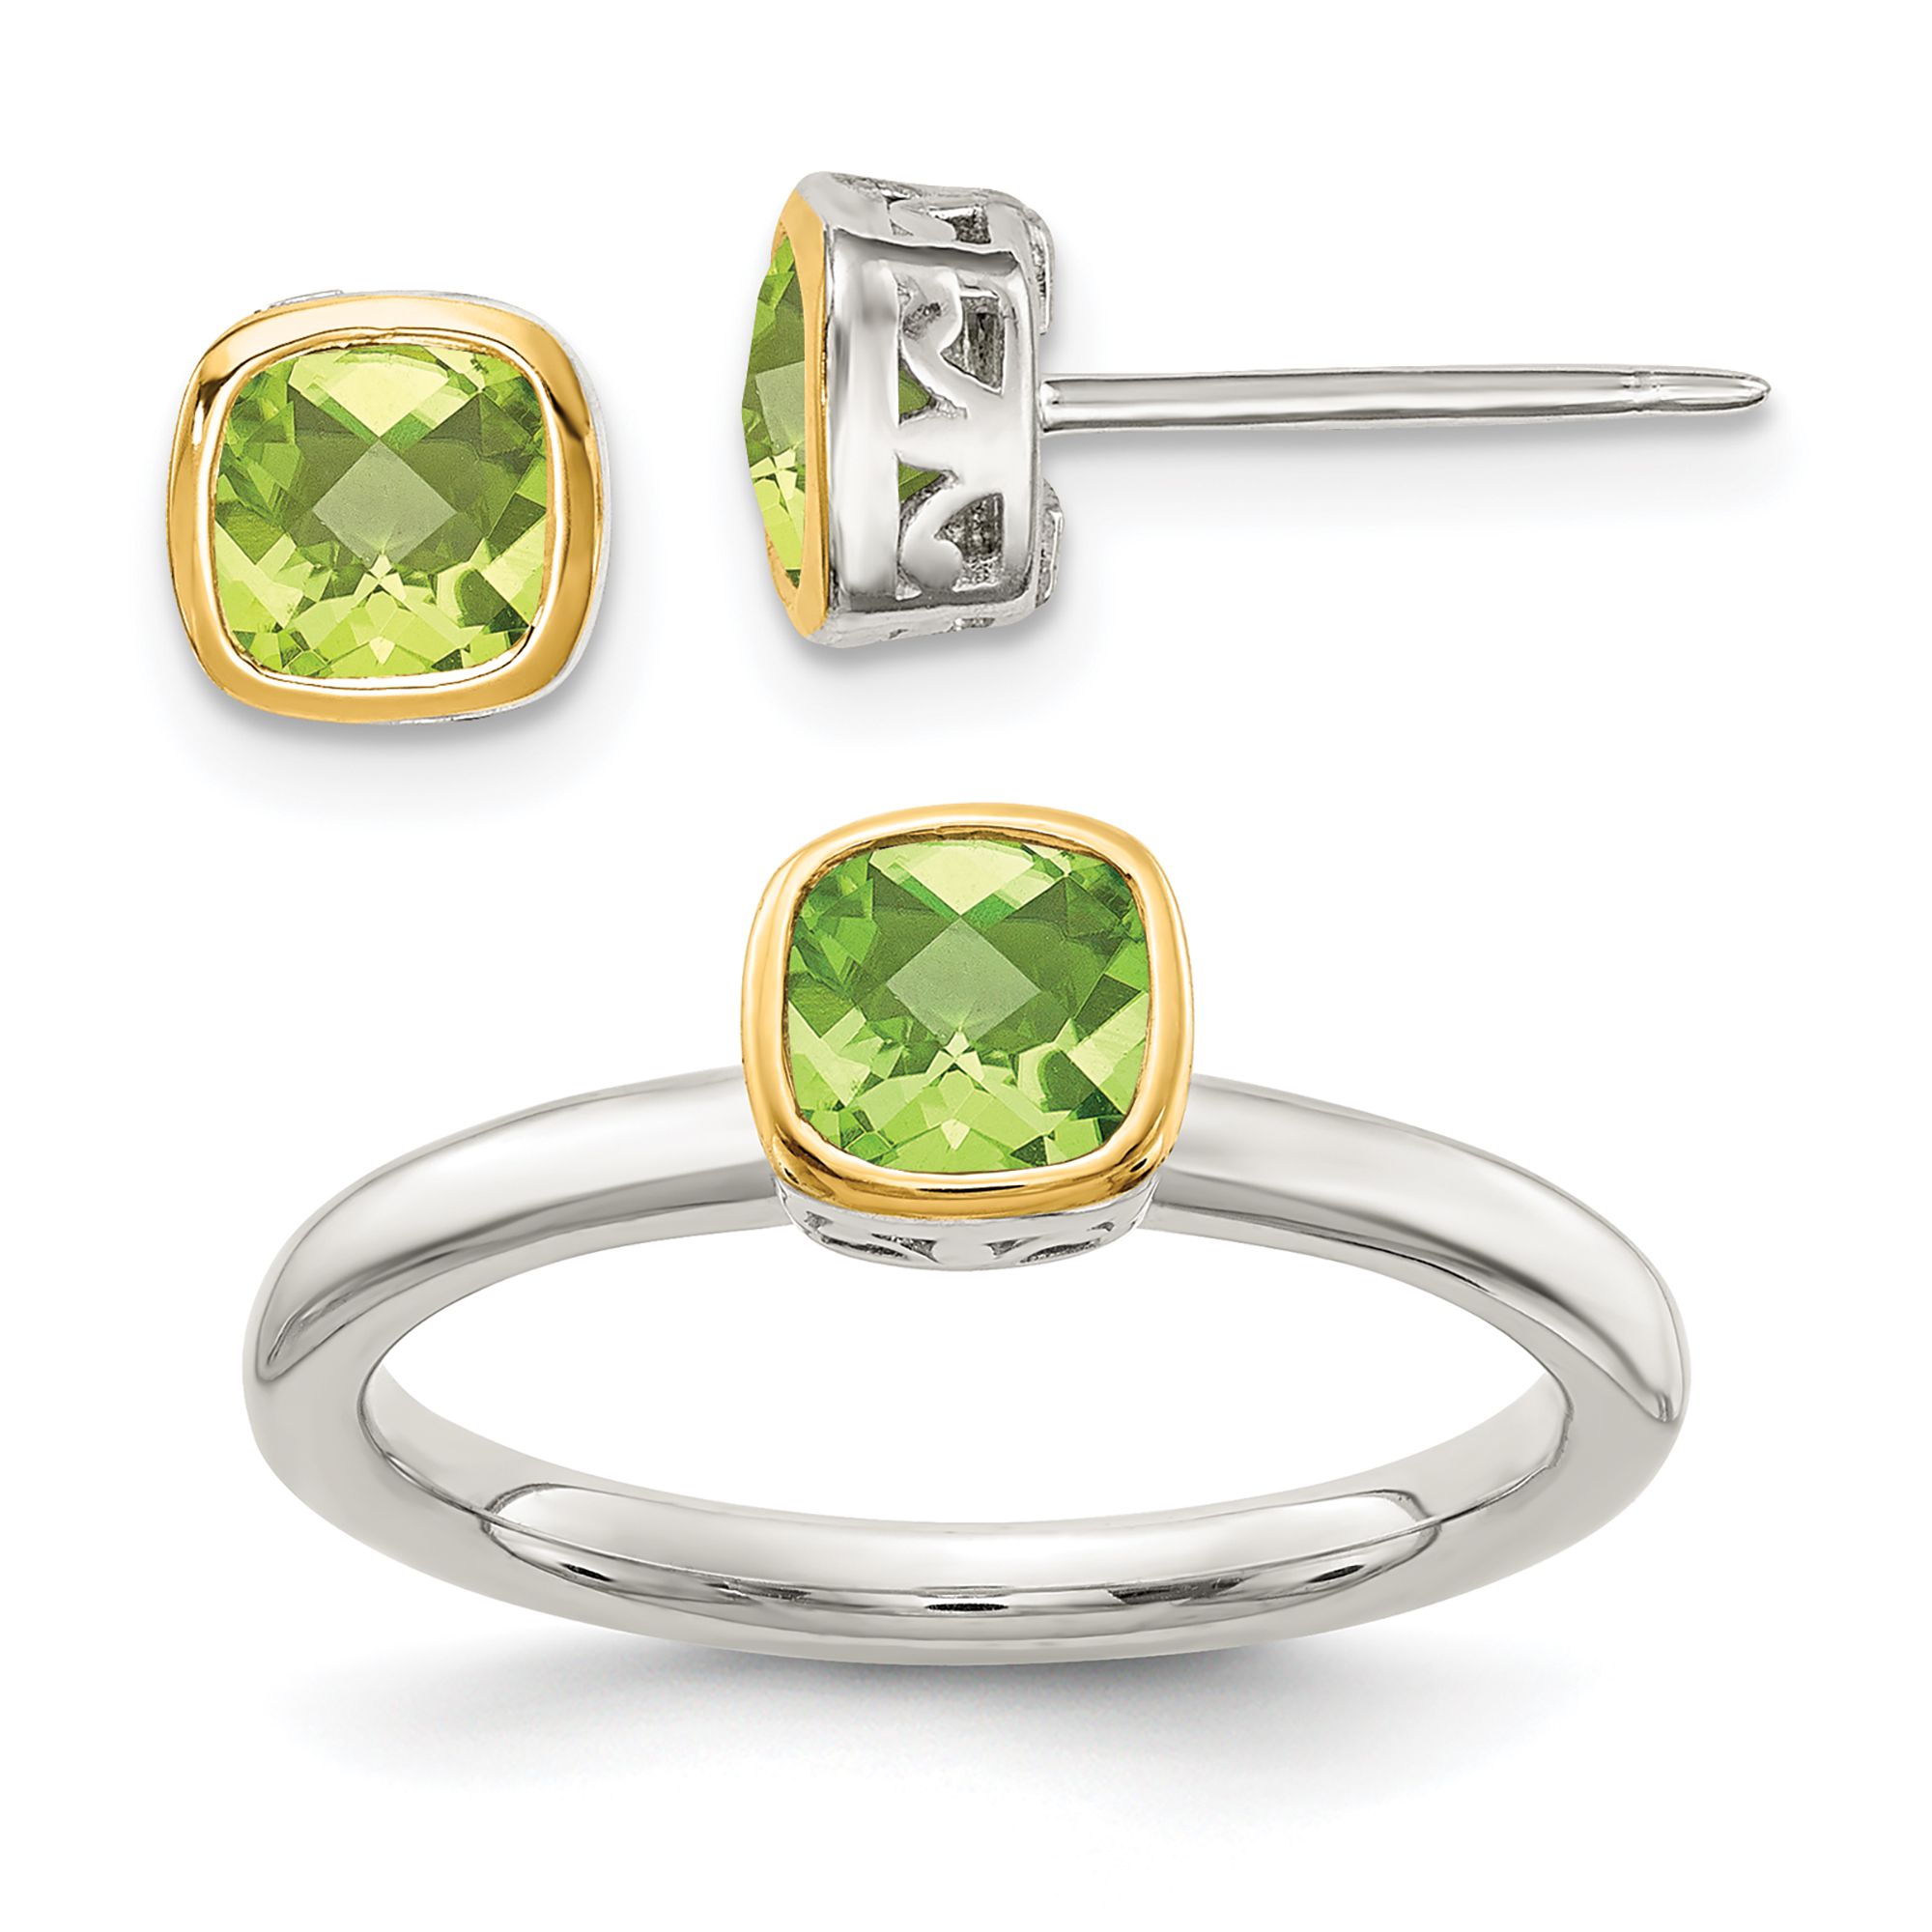 Cushion Peridot Two-Tone Yellow Gold and Sterling Silver Stud Earring and Ring Set | Size 8